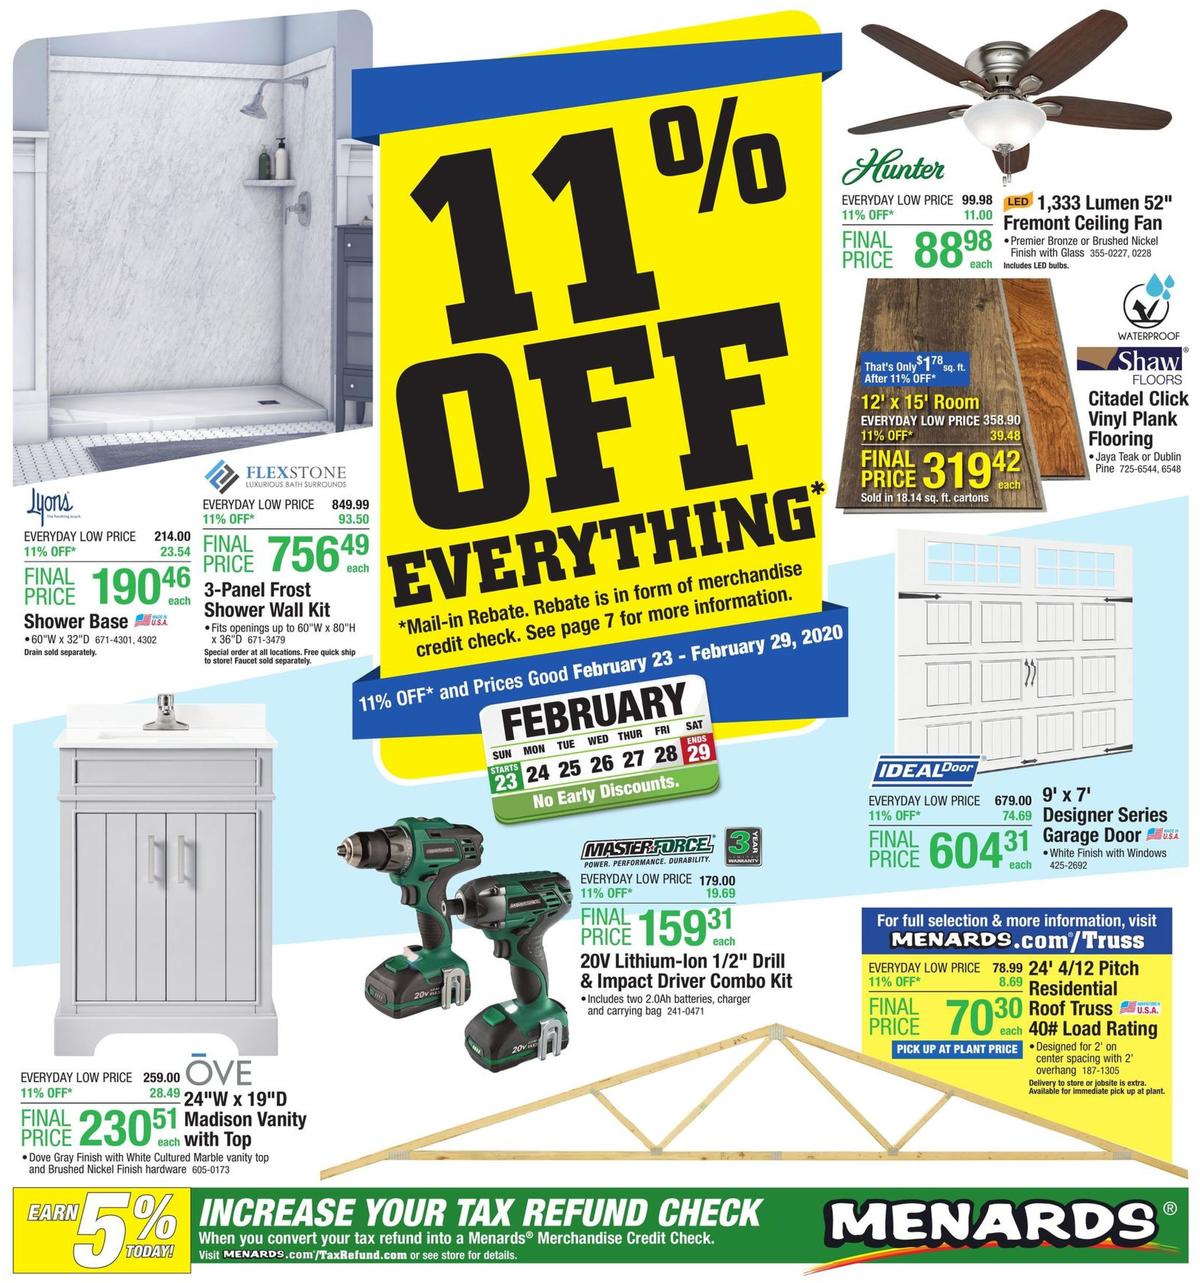 Menards Weekly Ads & Special Buys from February 23